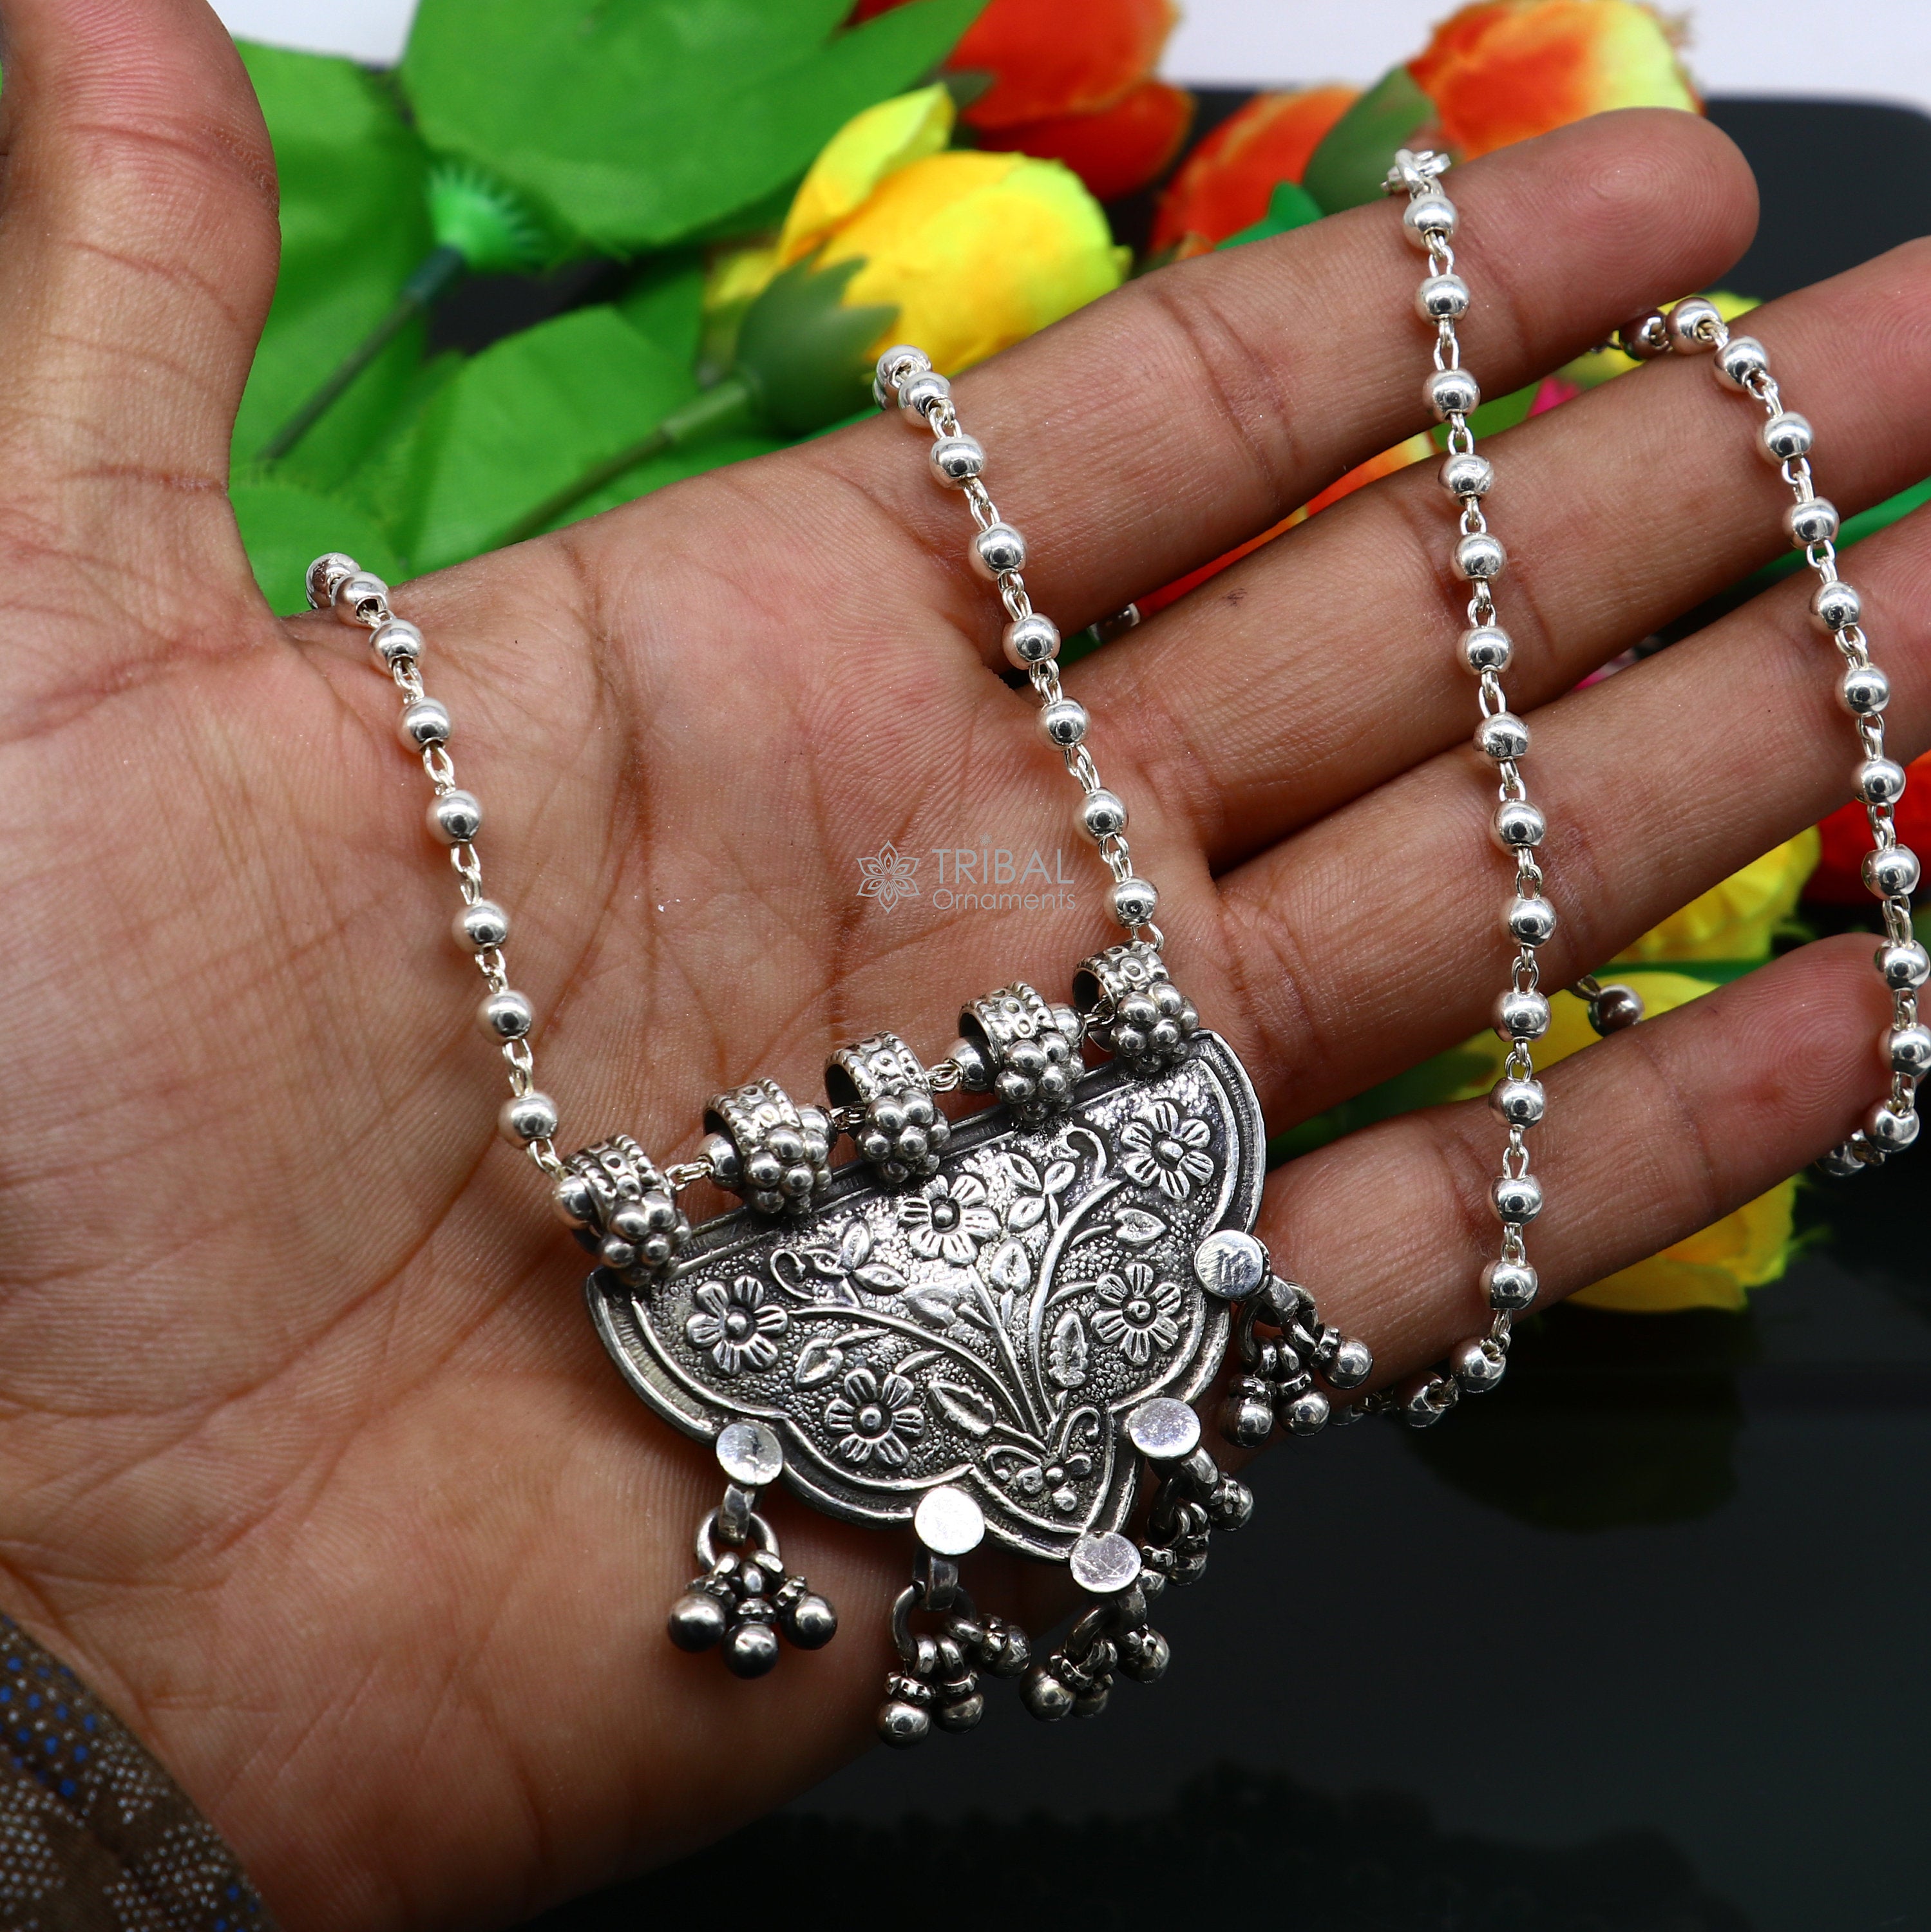 925 Silver Necklace Handmade Silver Necklace Excellent Silver Necklace at  Rs 1728.00 | खरे चांदी का गले का हार - Art Palace, Jaipur | ID:  2851920649555